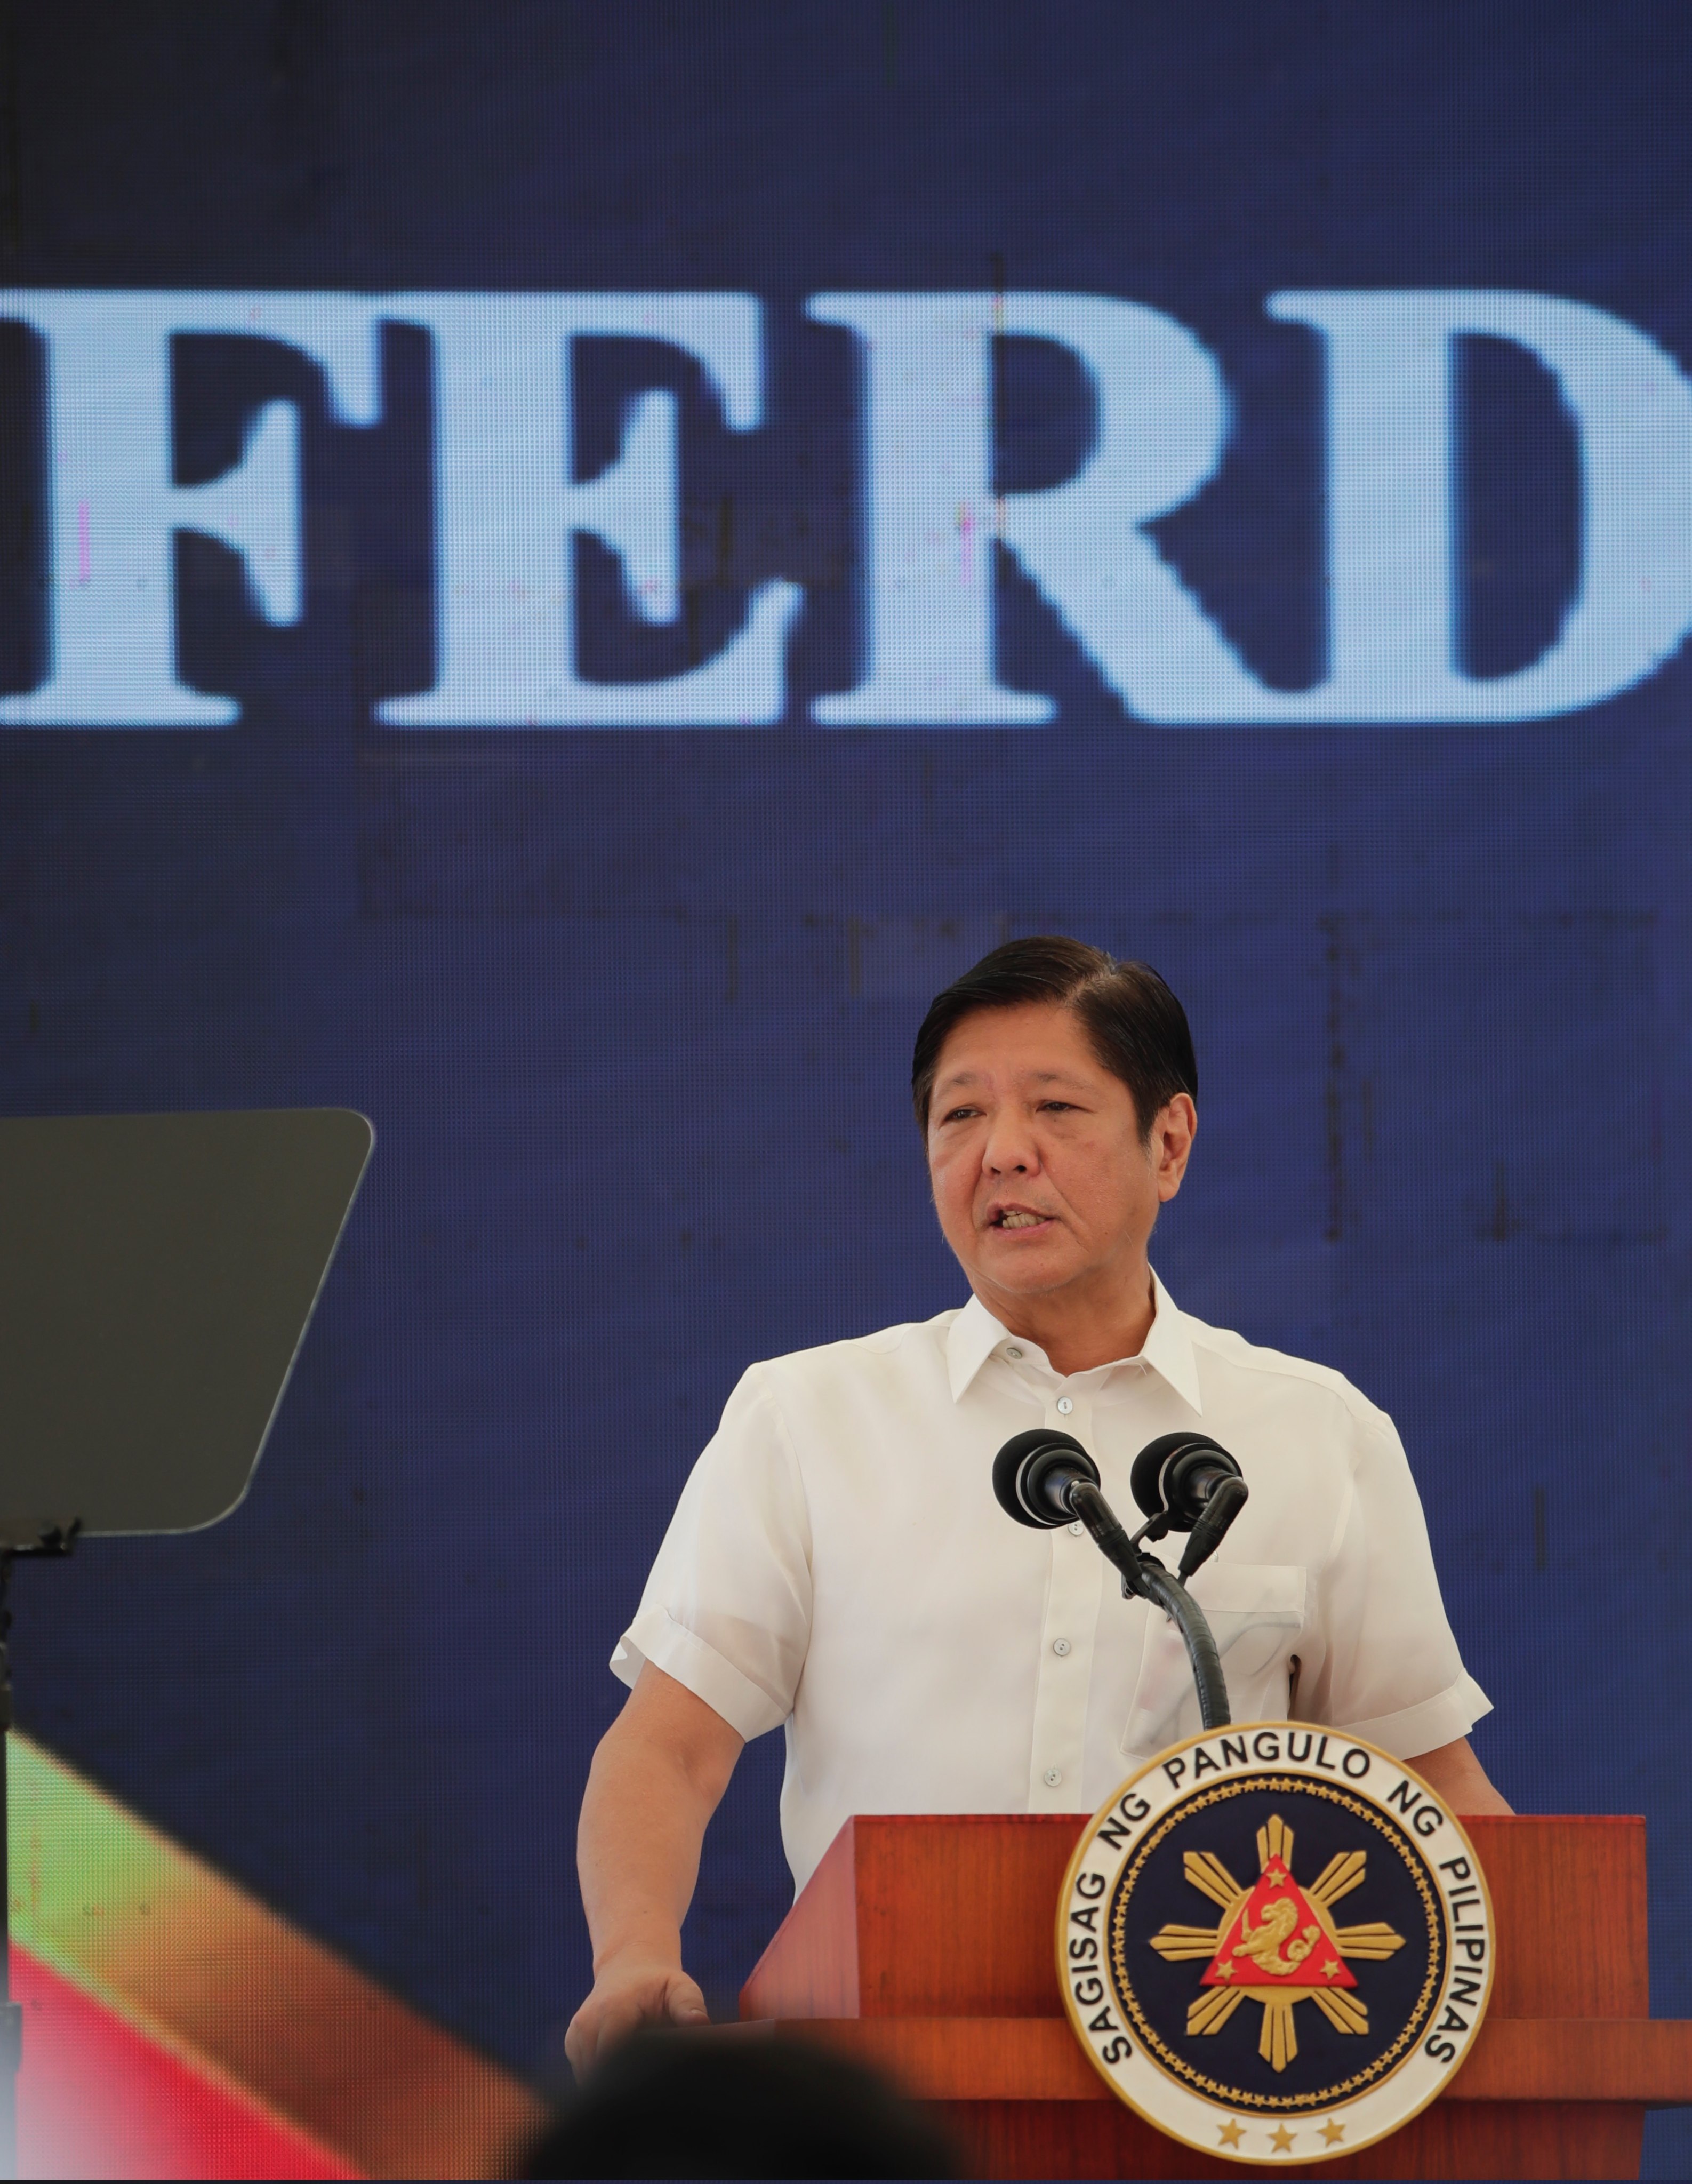 Philippine President Ferdinand Marcos Jnr speaks at an event in Metro Manila last month. The Maharlika Investment Fund will allow the Philippines to cut its reliance on borrowing to fund infrastructure development, Marcos Jnr has said. Photo: EPA-EFE